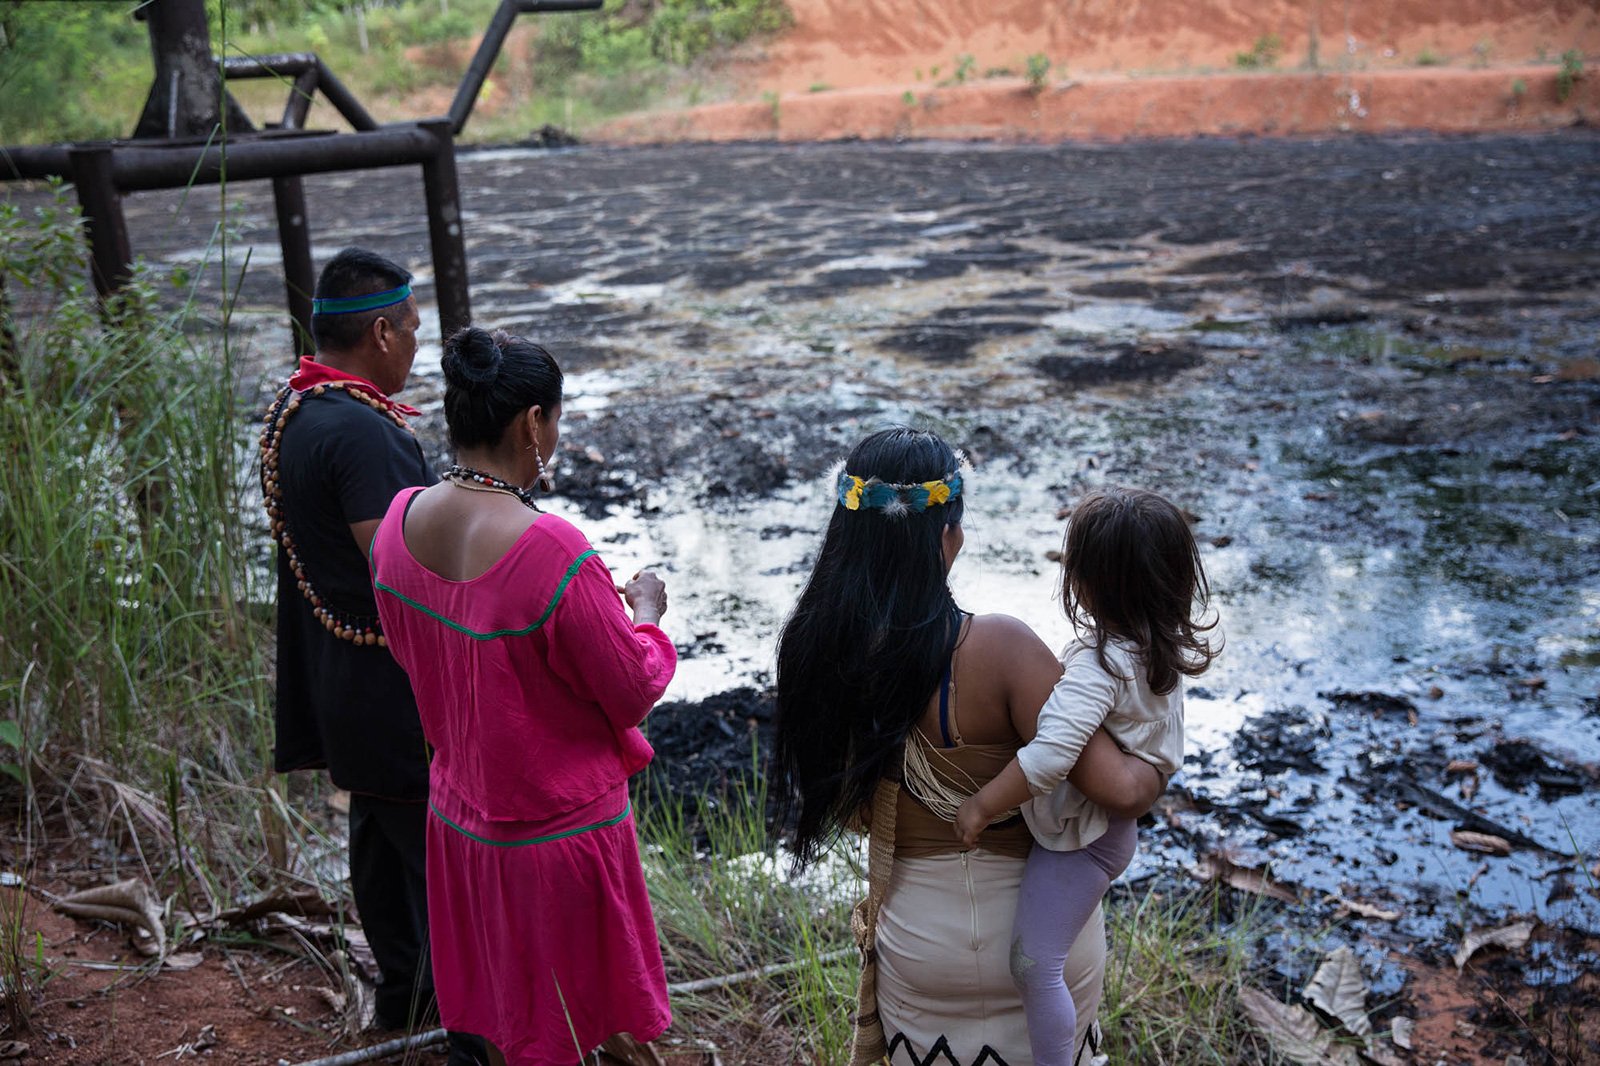 Kofan leader Emergildo Criollo, Siona leader Flor Tangoy alongside Waorani leader Nemonte Nenquimo and her daughter stand on the edge of toxic waste pit in the northern Ecuadorian Amazon.